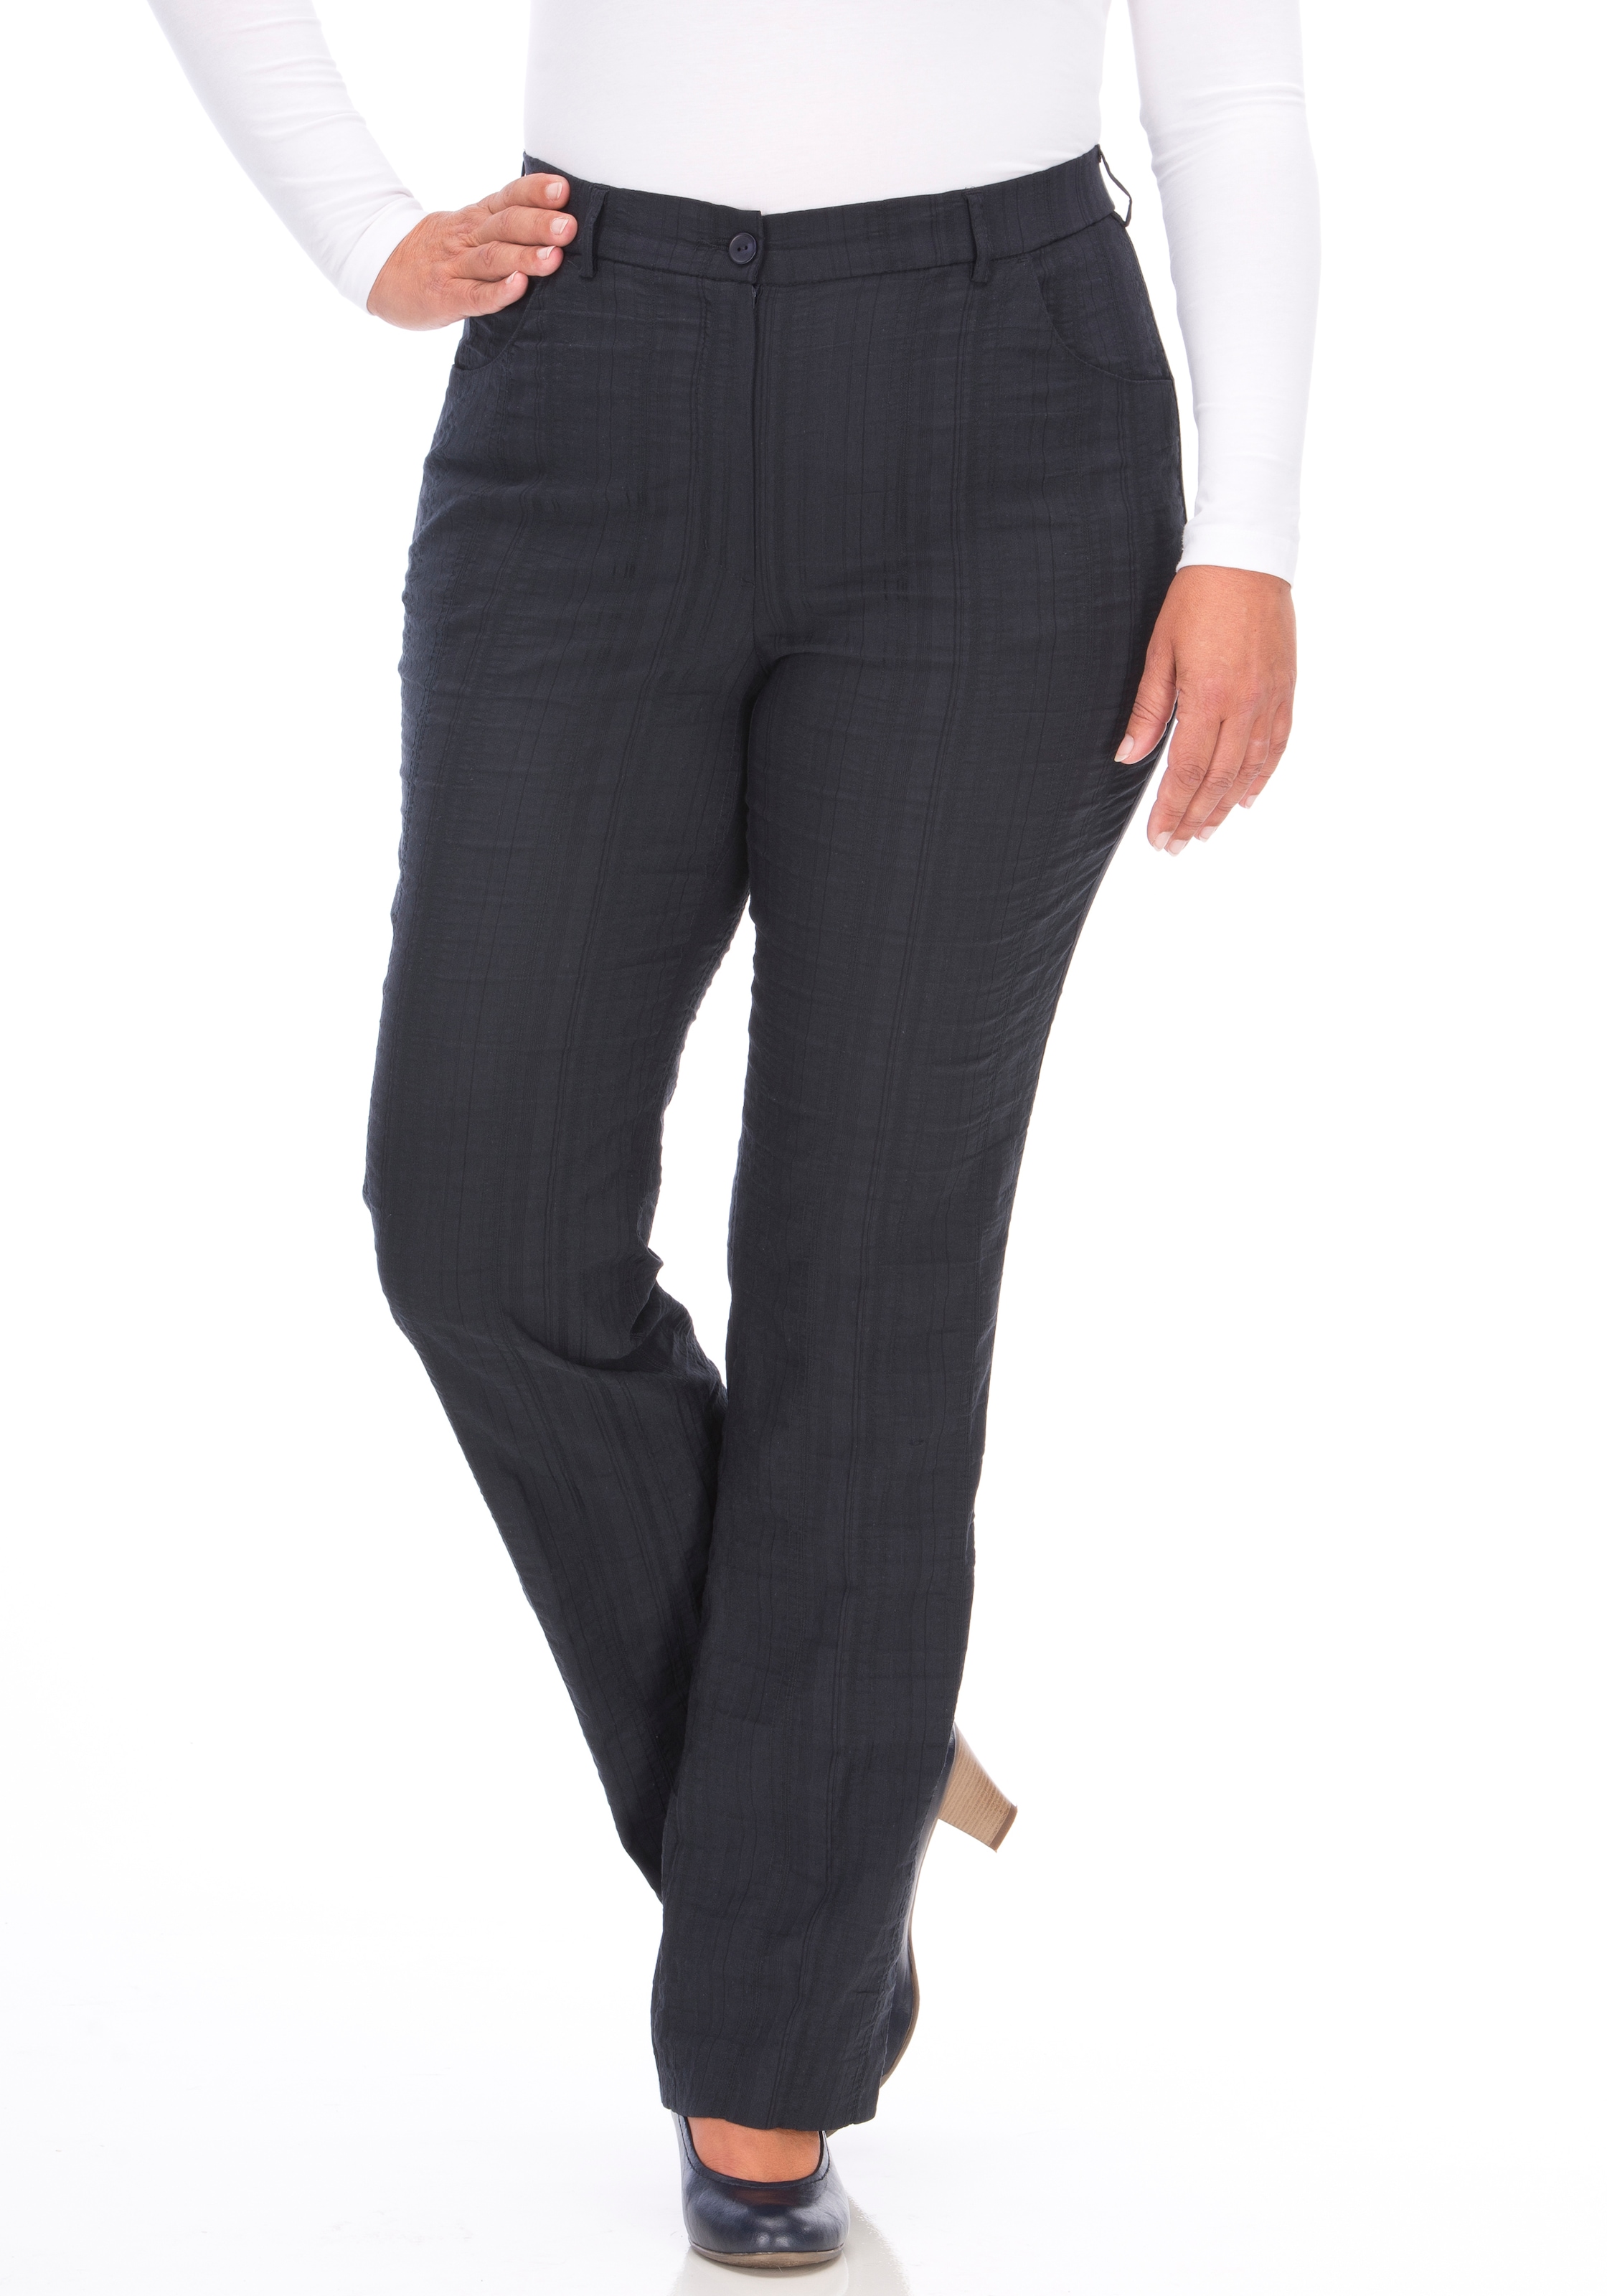 KjBRAND Stoffhose optimale in bei »Bea«, Quer-Stretch ♕ Passform